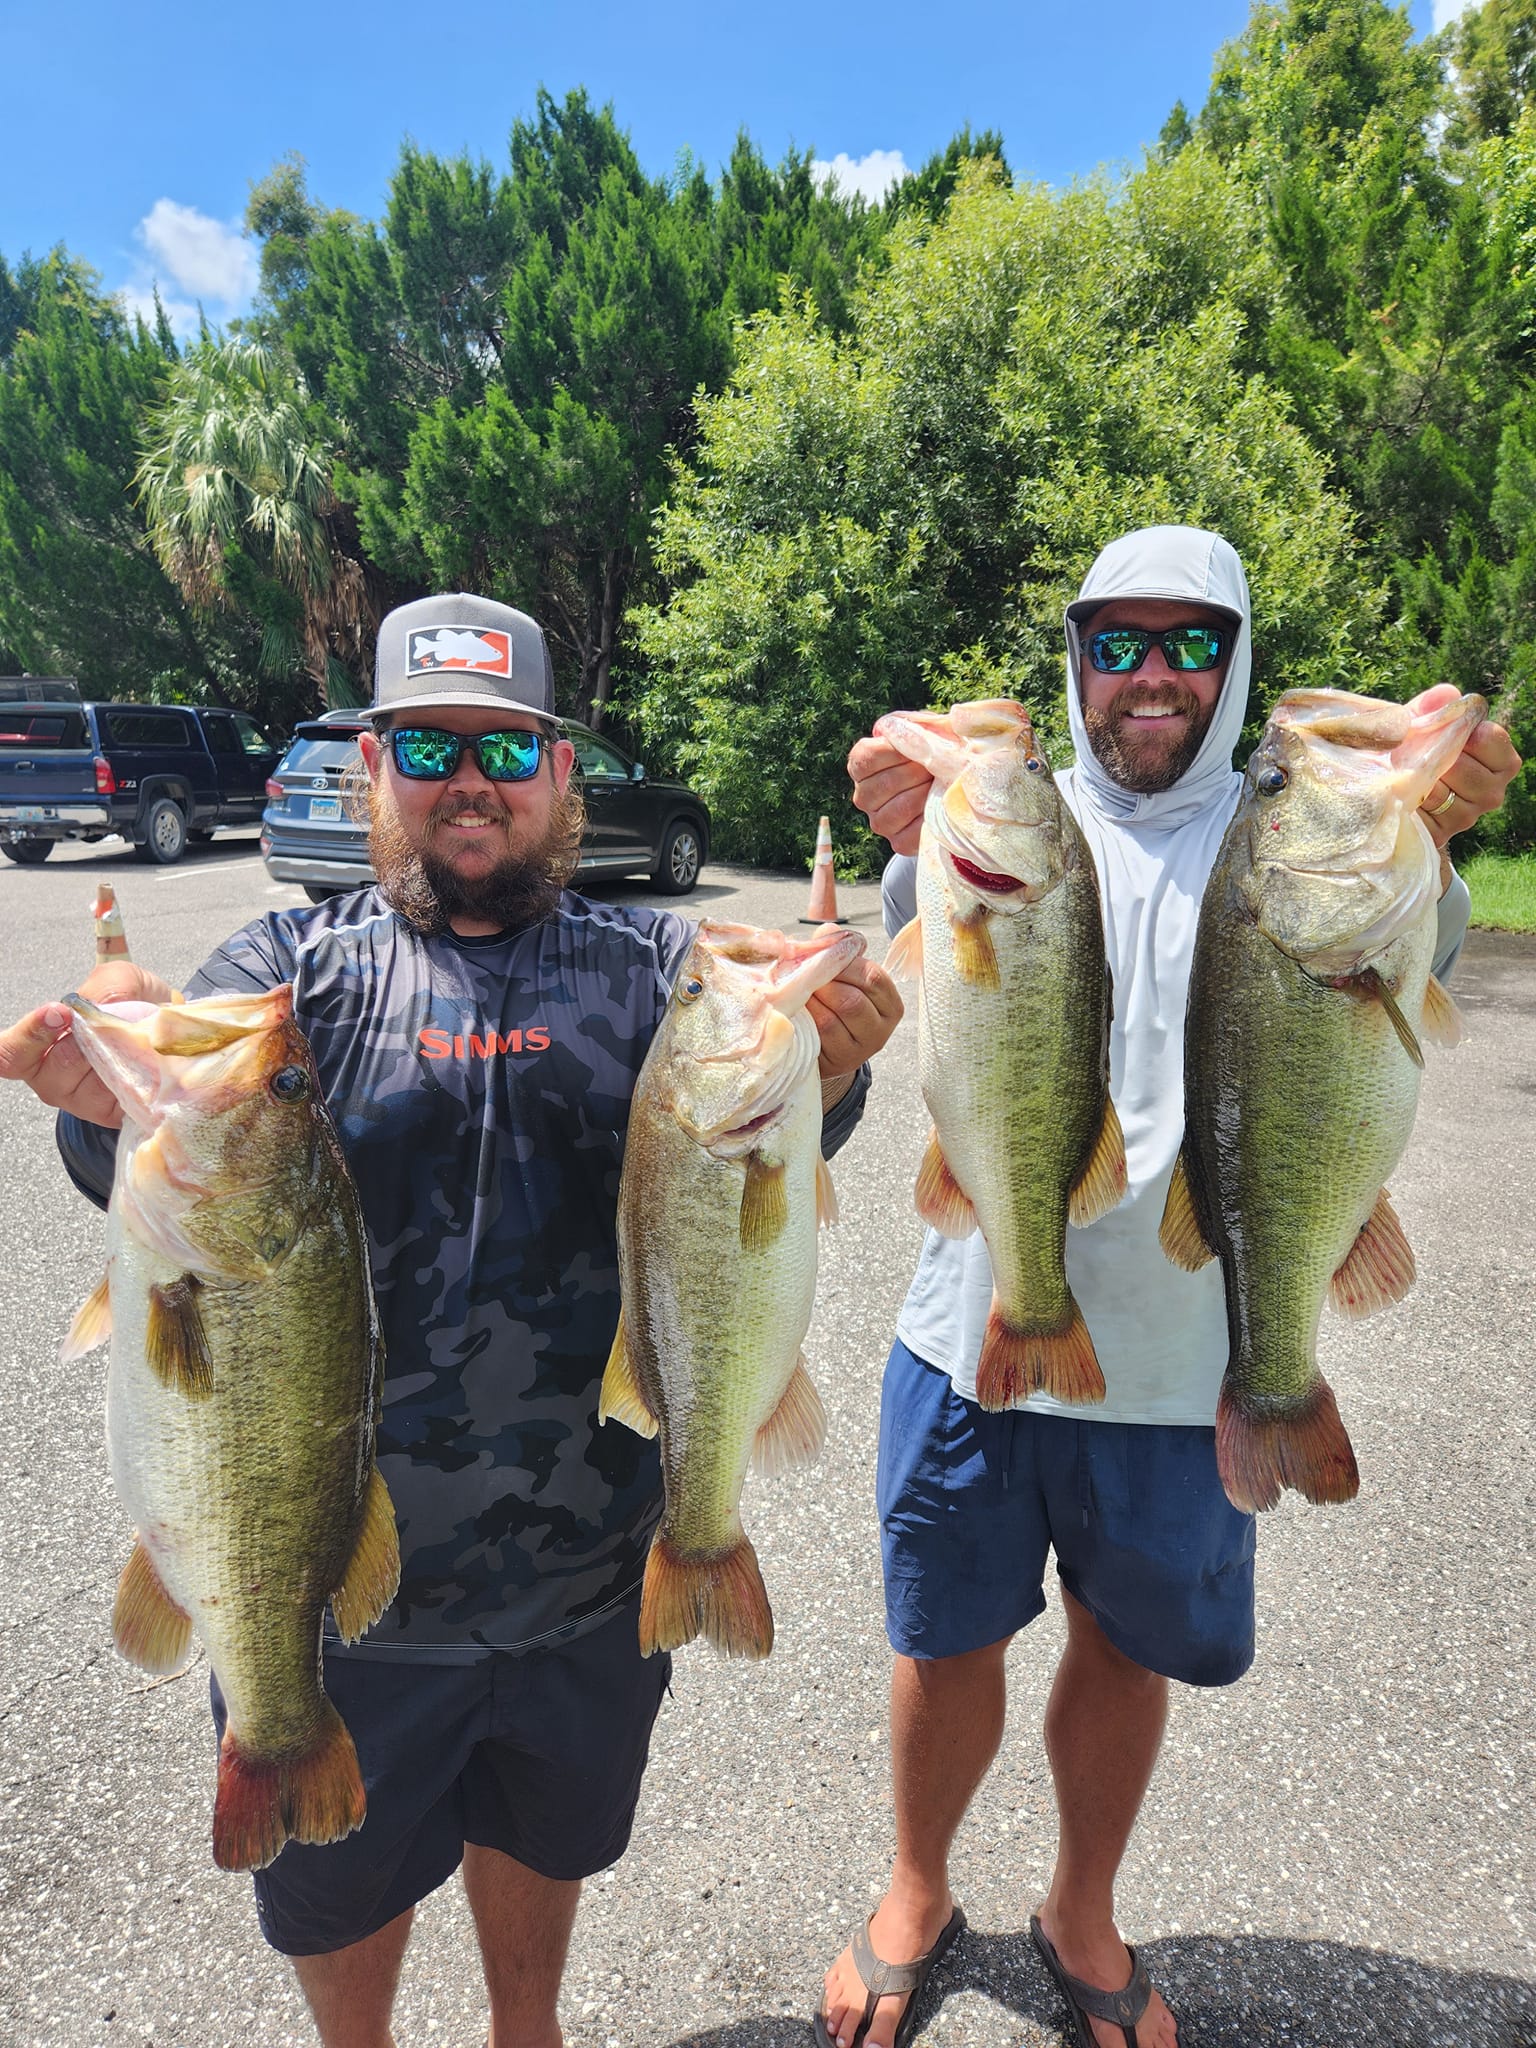 Ricky Teschendorf and Blake Mead Bag Win at Lake Tarpon Xtreme Event - Fishing  Tournament Report